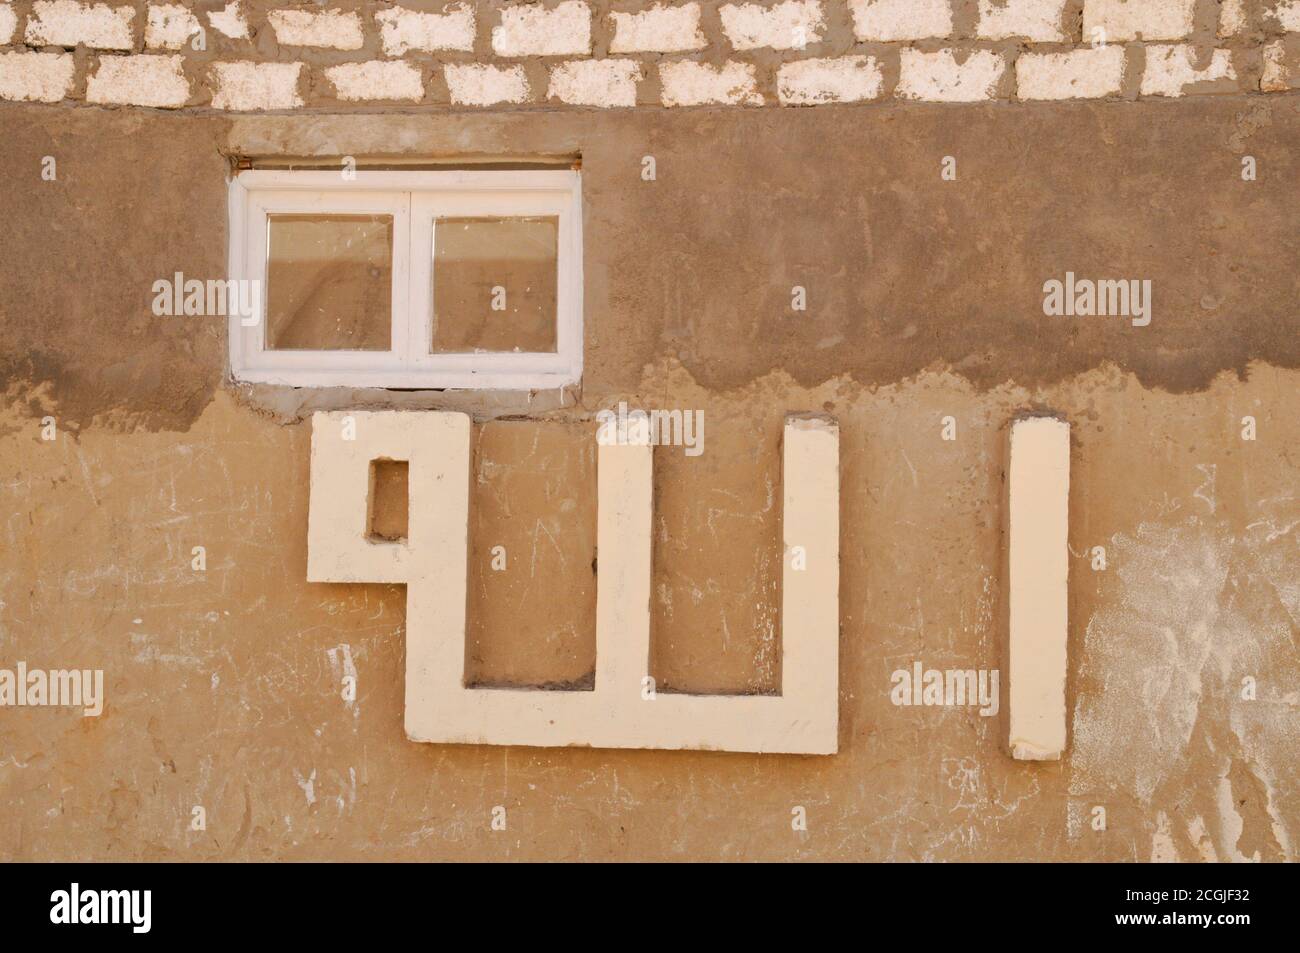 'Allah' written on a wall in the medieval Saharan mud village of al Qasr, in Dakhla Oasis, in the Western Desert of the Sahara, New Valley, Egypt. Stock Photo